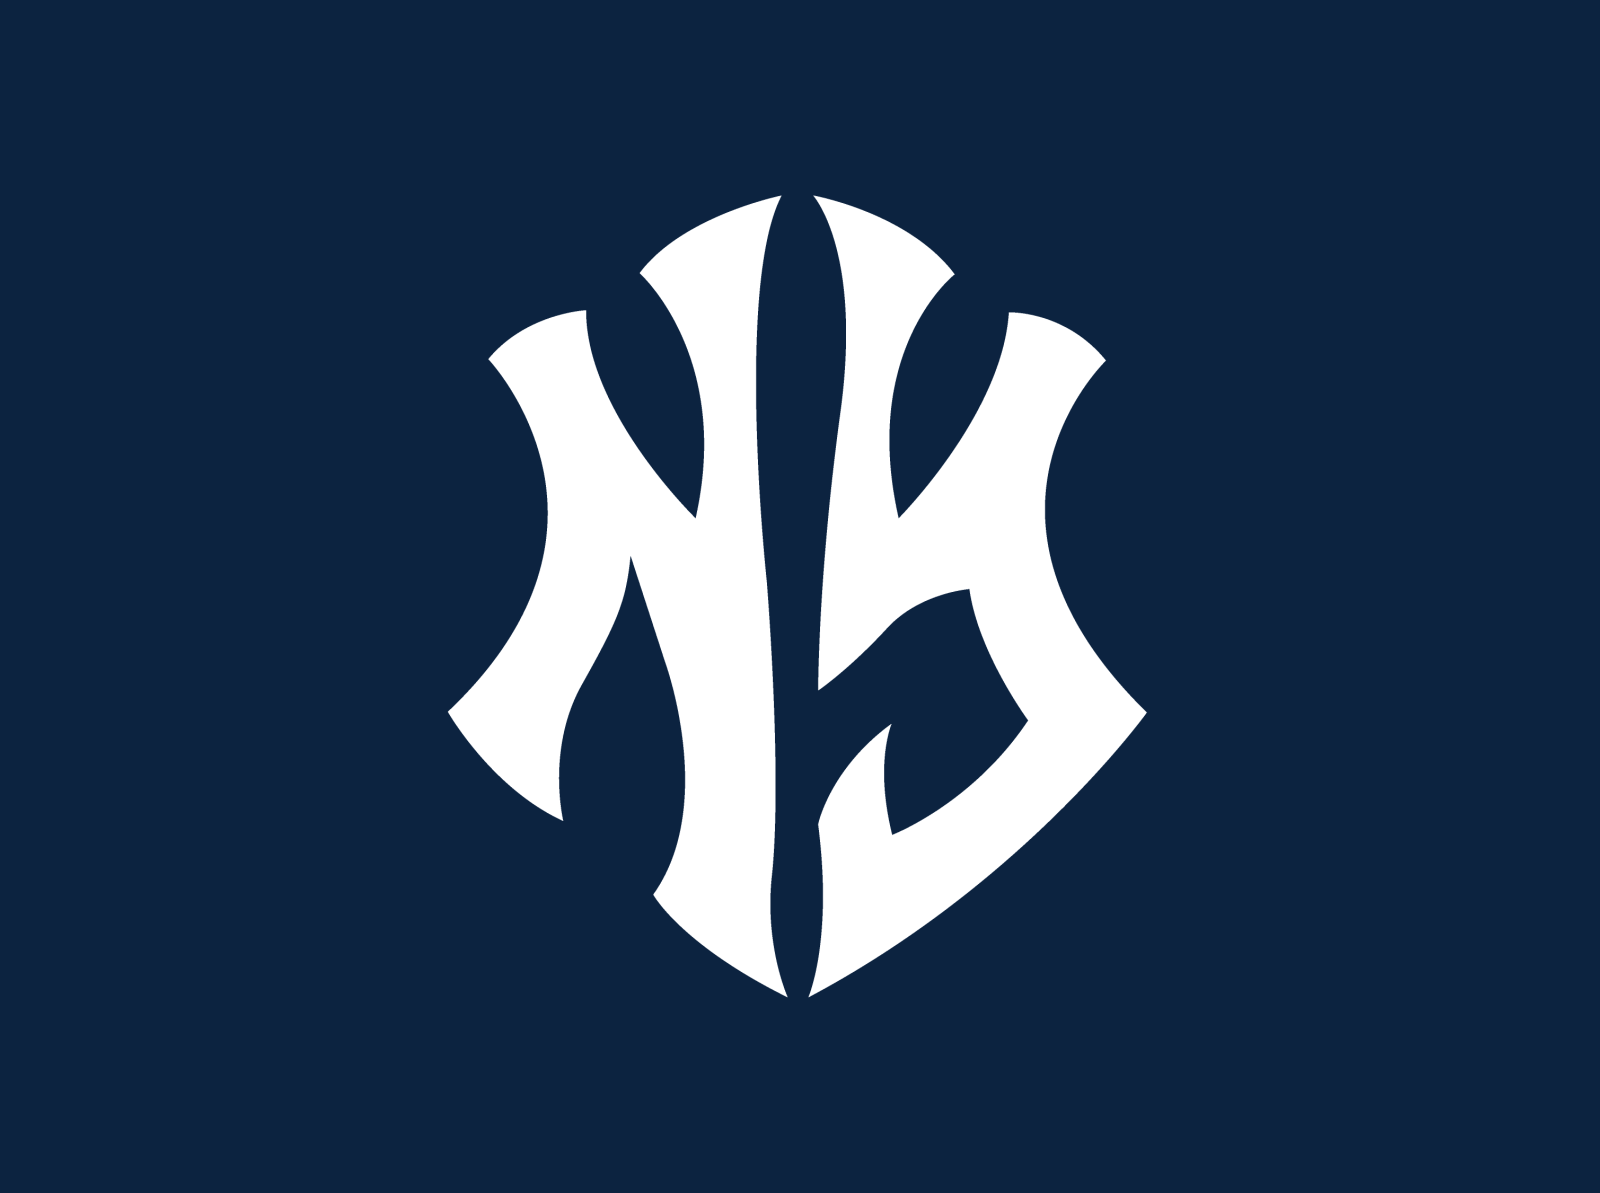 Yankees / Giants by Sam Harachis on Dribbble